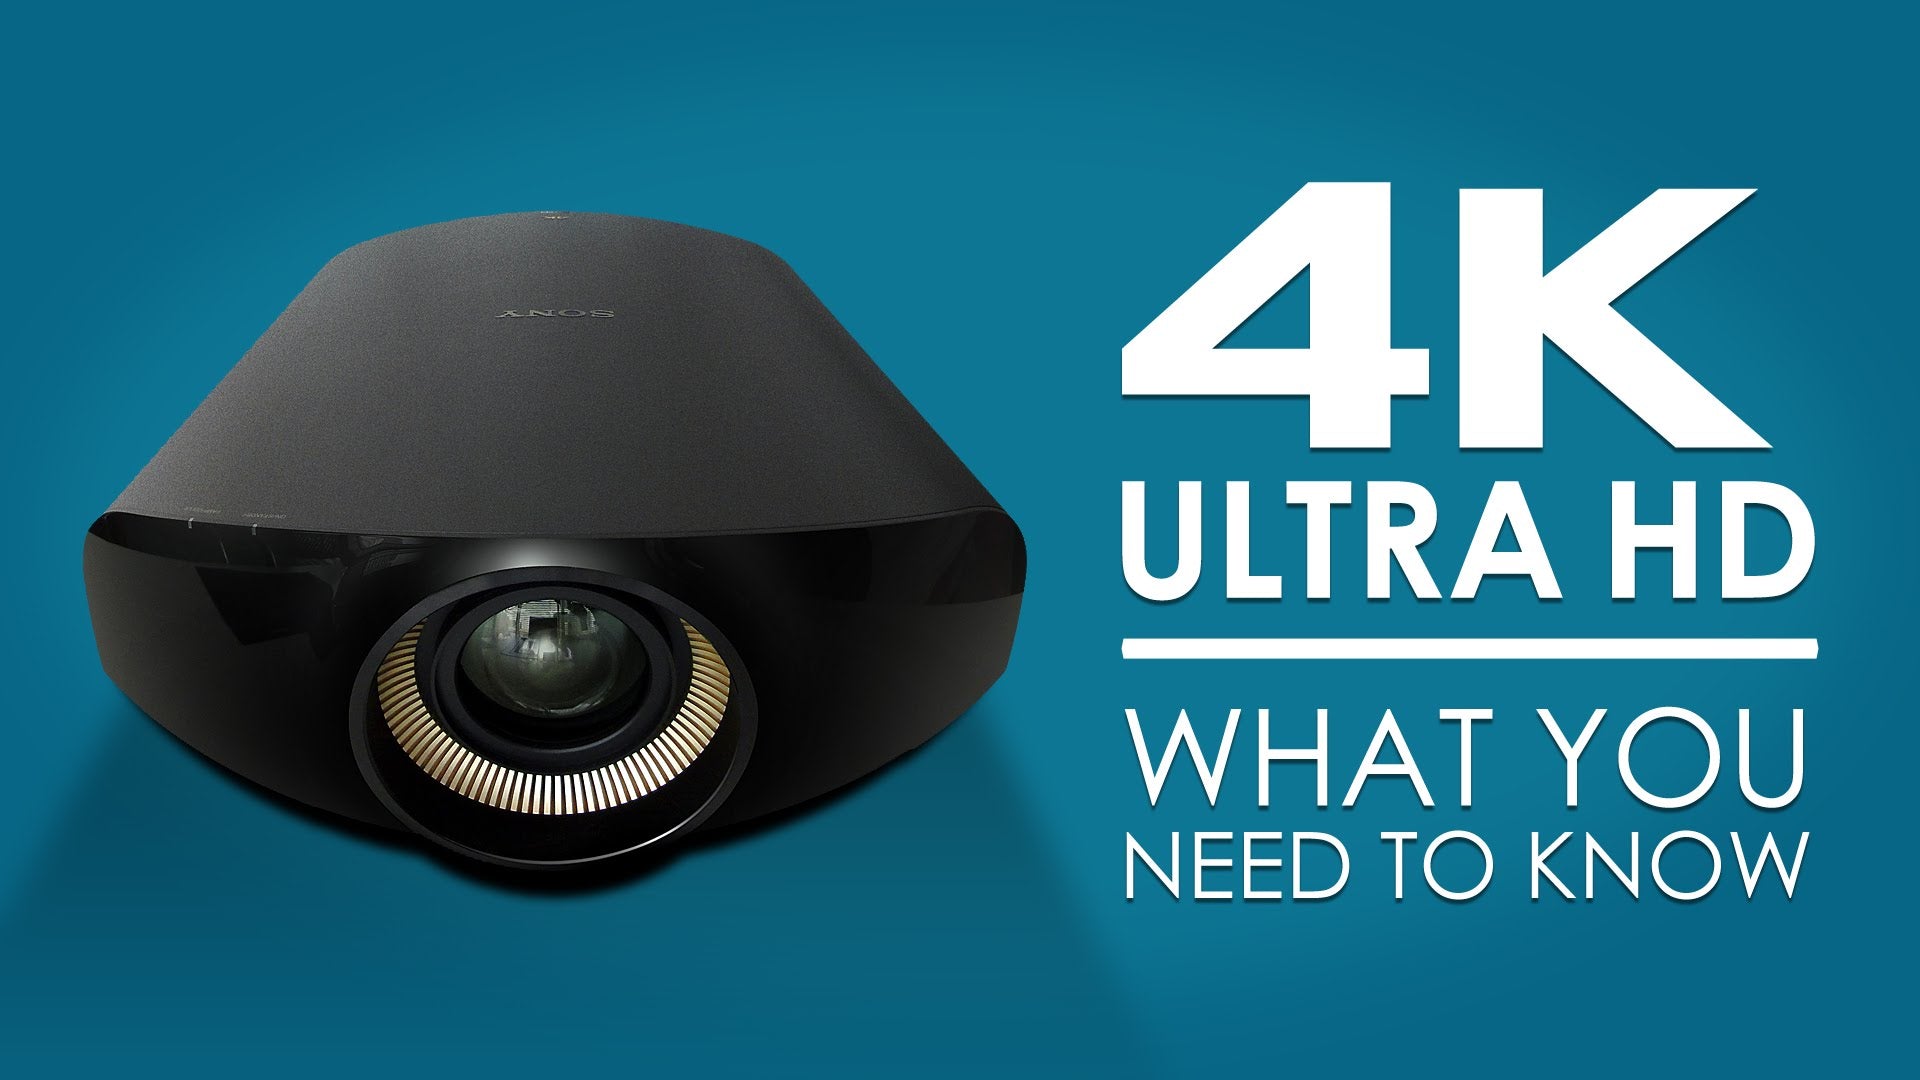 Load video: 4K/UltraHD: What You Need To Know